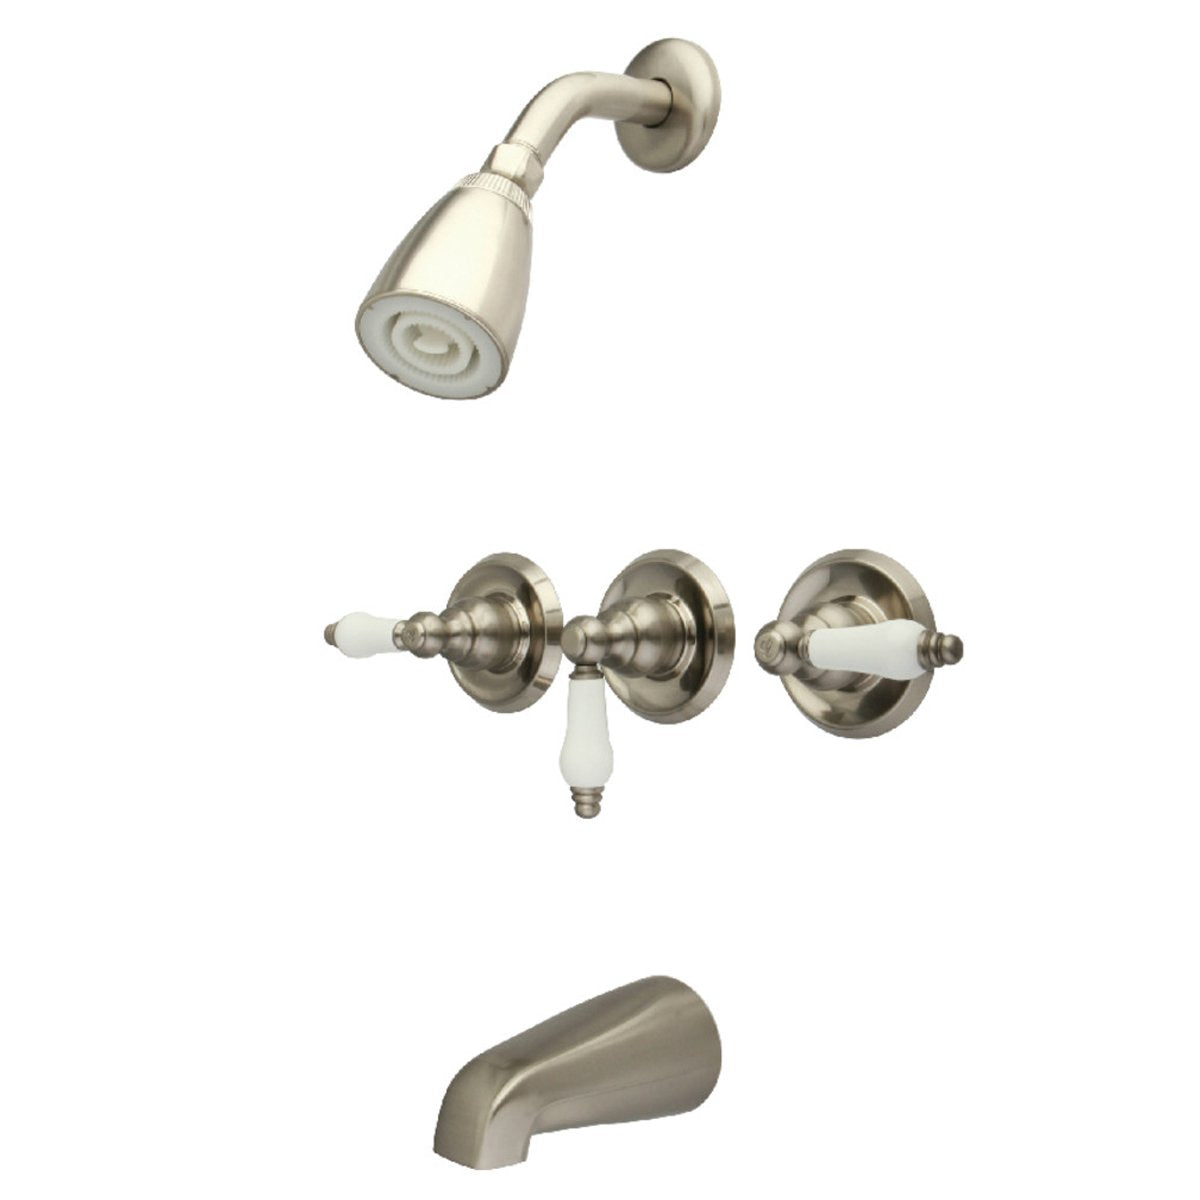 Kingston Brass 3-Lever Handles Tub and Shower Faucet